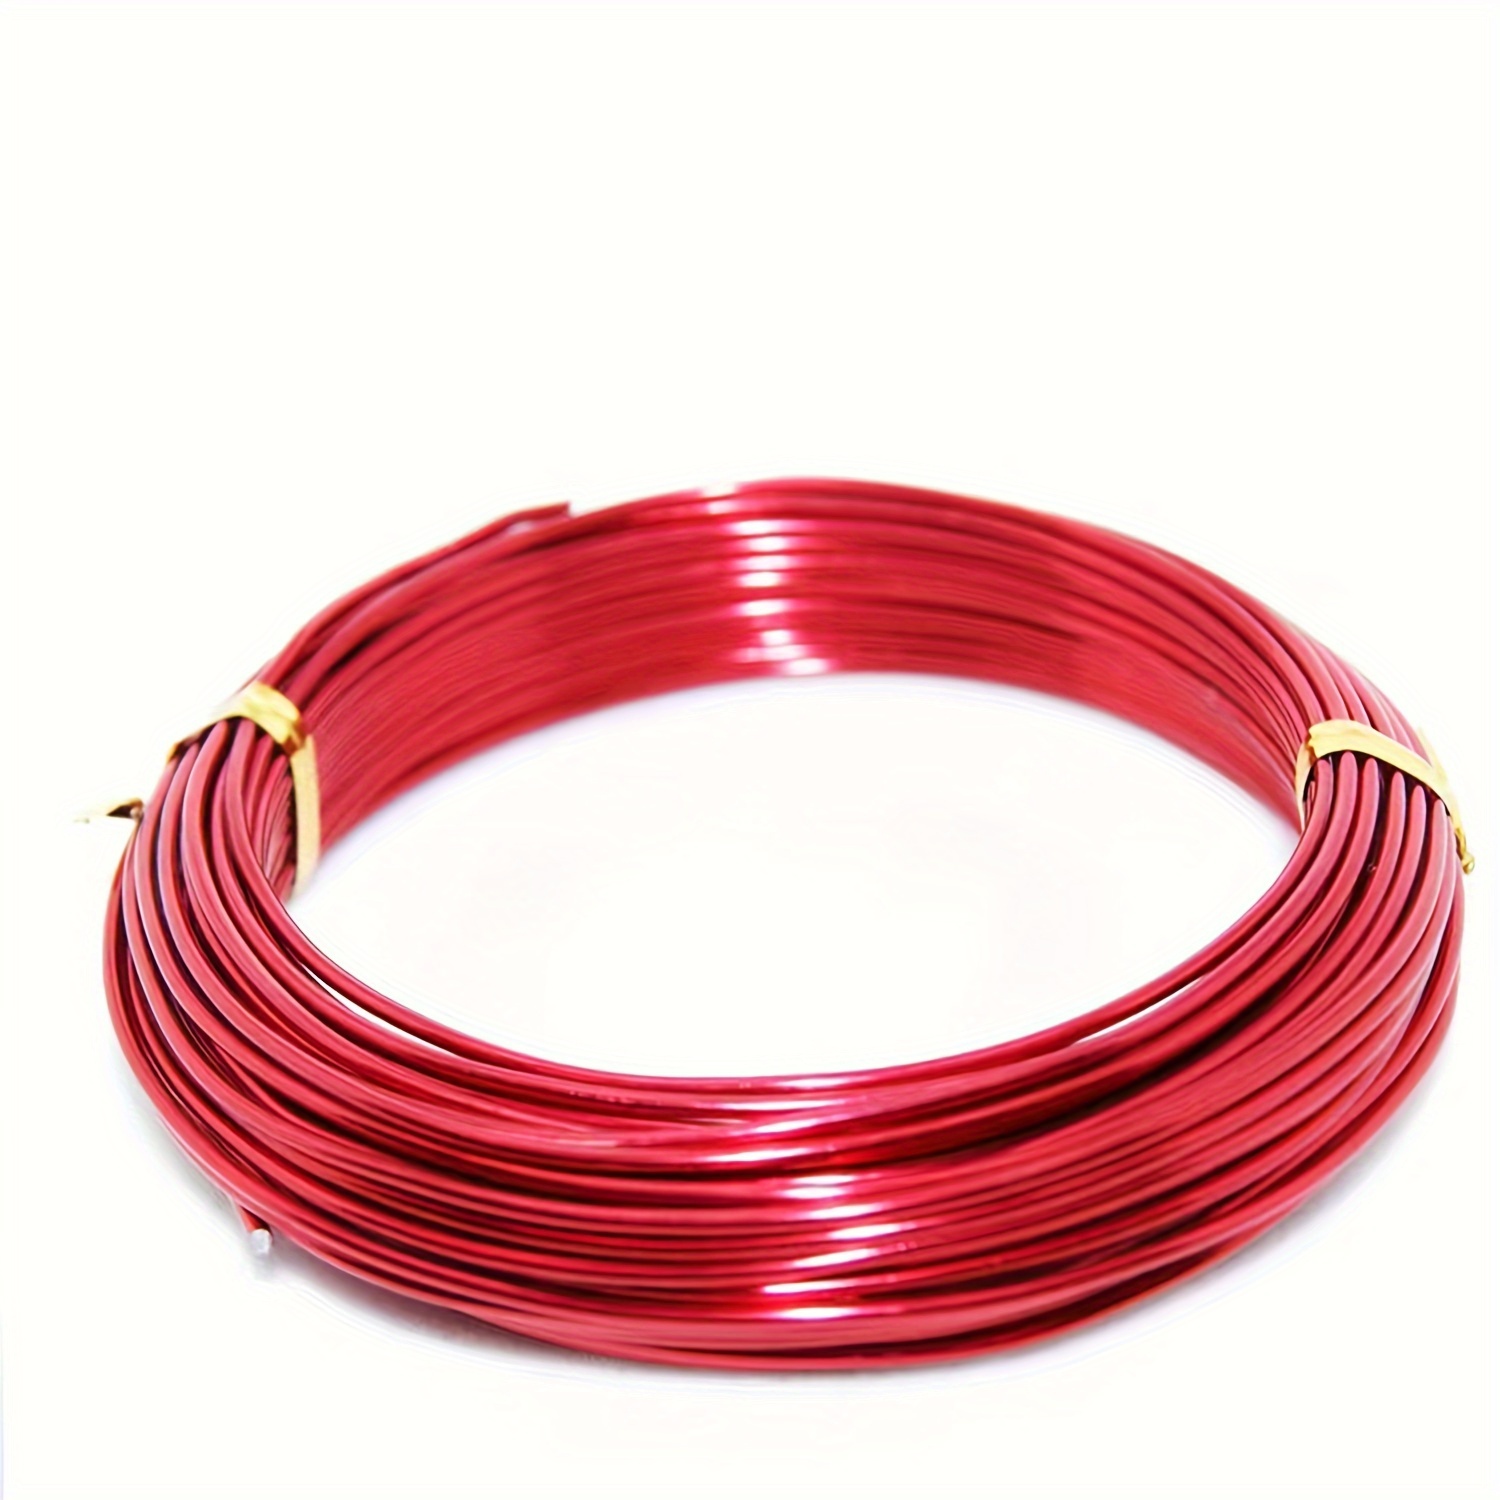 Aluminum Wire Bendable Metal Craft Wire For Making Skeleton DIY Crafts 5m  Long